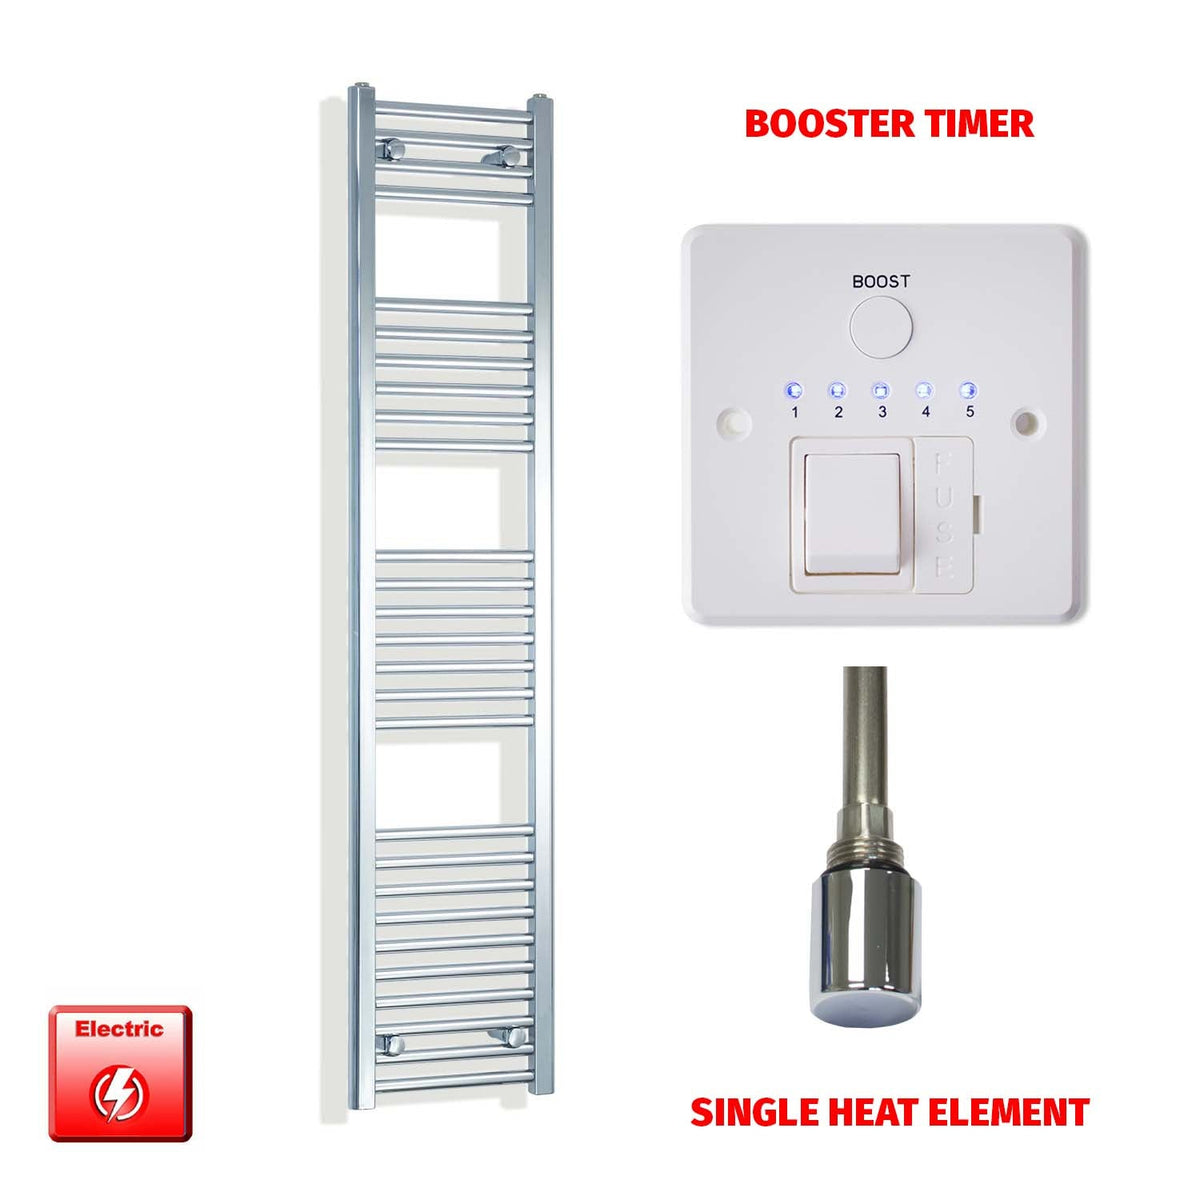 1600mm High 300mm Wide Pre-Filled Electric Heated Towel Radiator Straight Chrome Single Heat Booster Timer